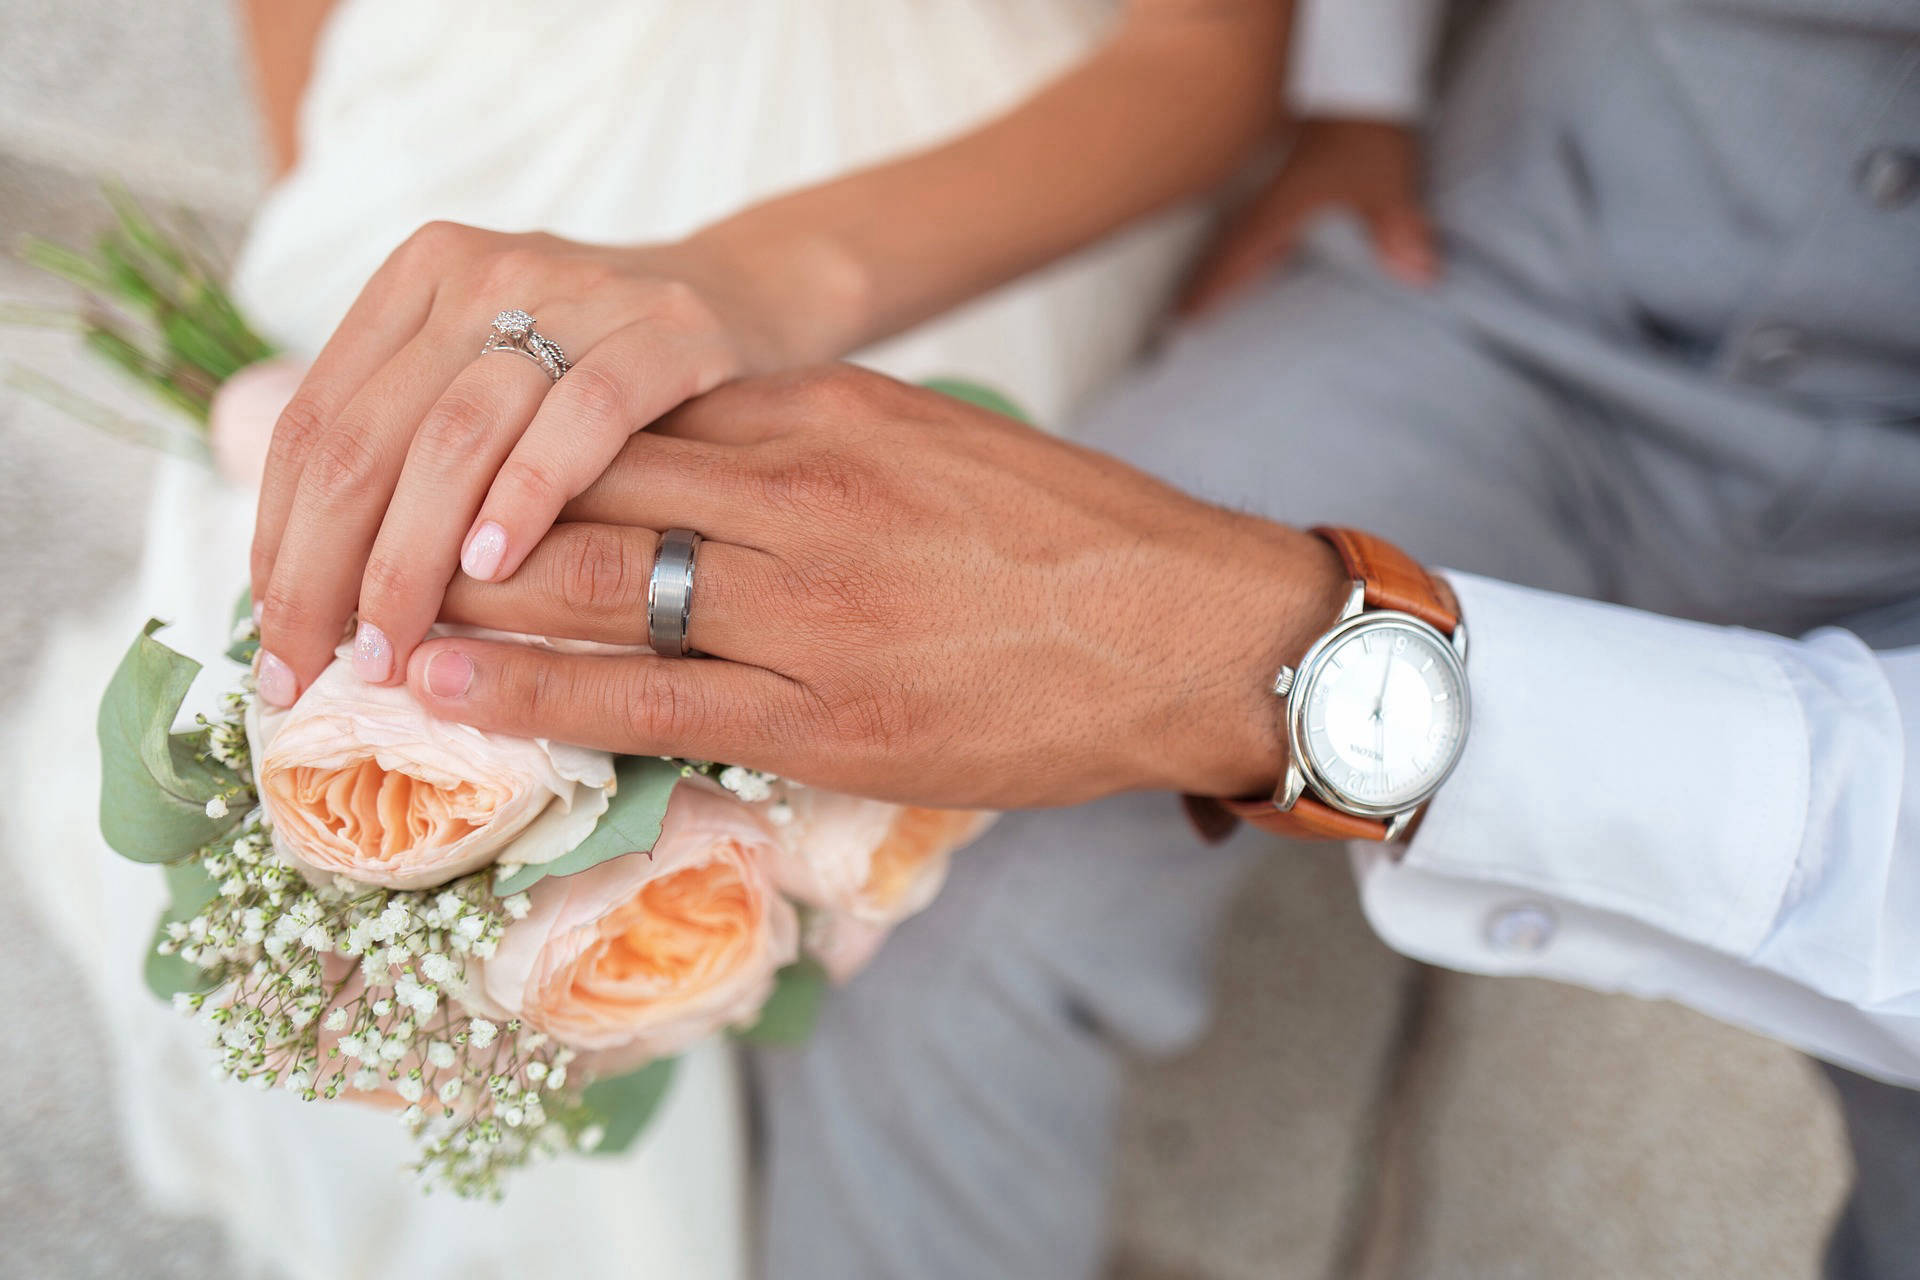 This image displays a man and woman's hand showing their wedding bands.